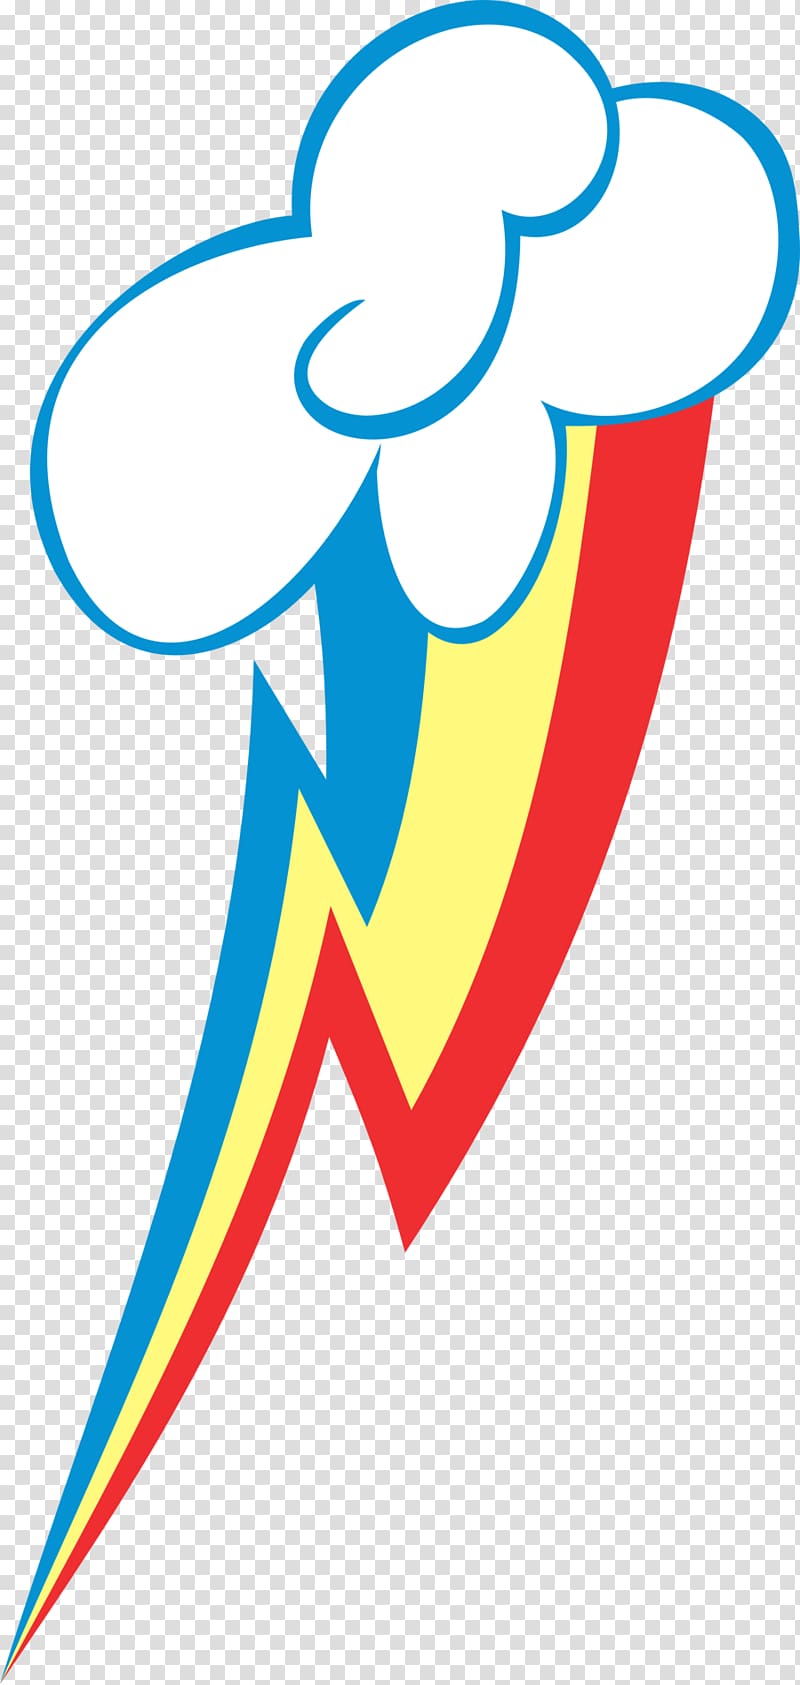 Rainbow Dash Rarity Cutie Mark Crusaders My Little Pony, dashed transparent background PNG clipart